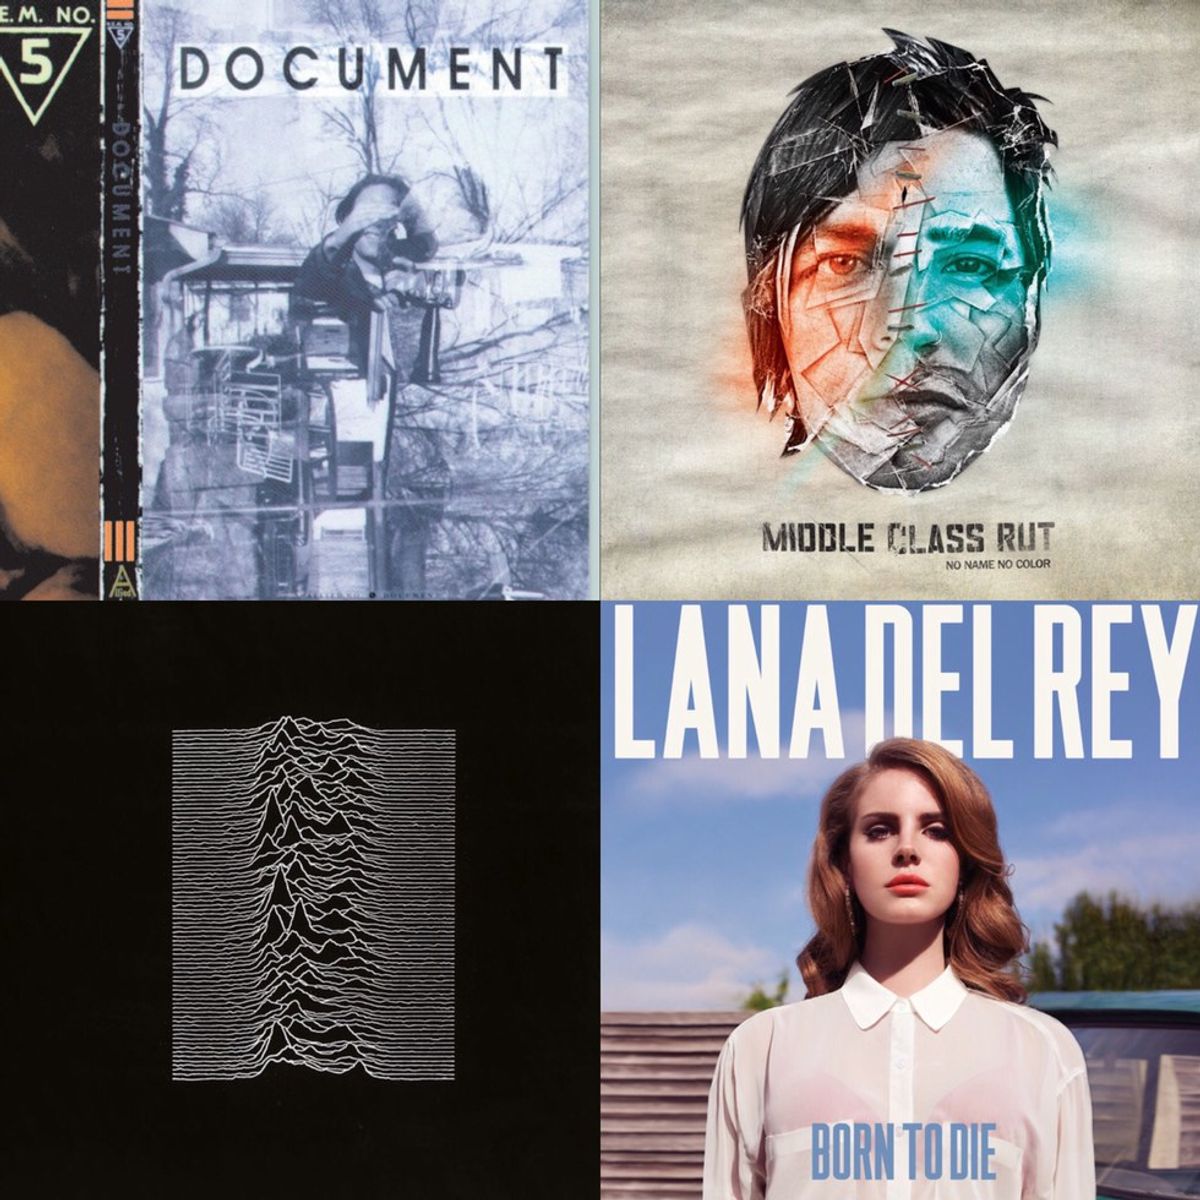 Songs To Make You Reflect On the Elect